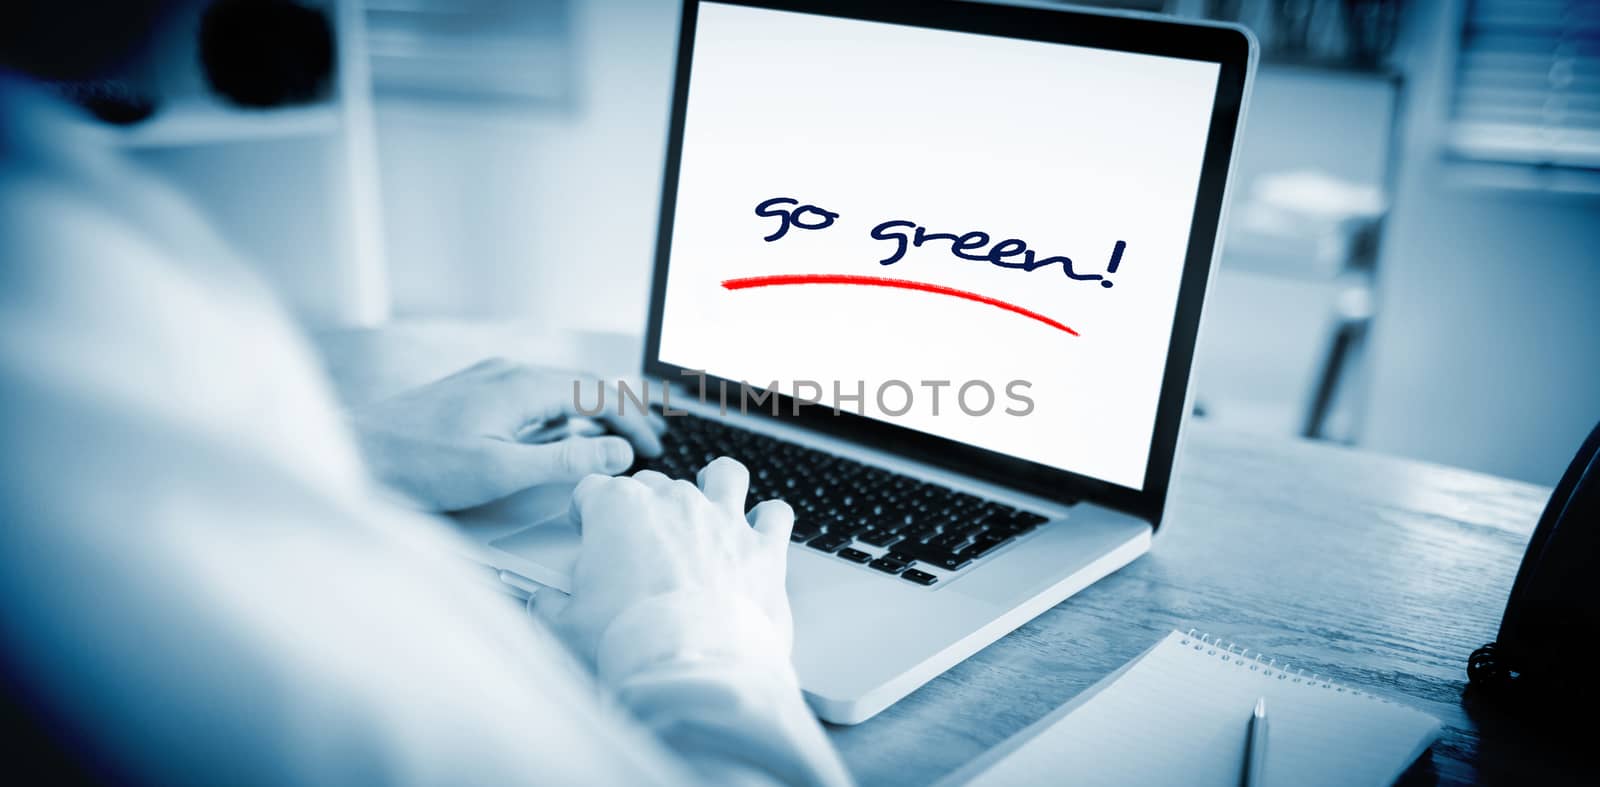 Go green! against businessman working on his laptop by Wavebreakmedia